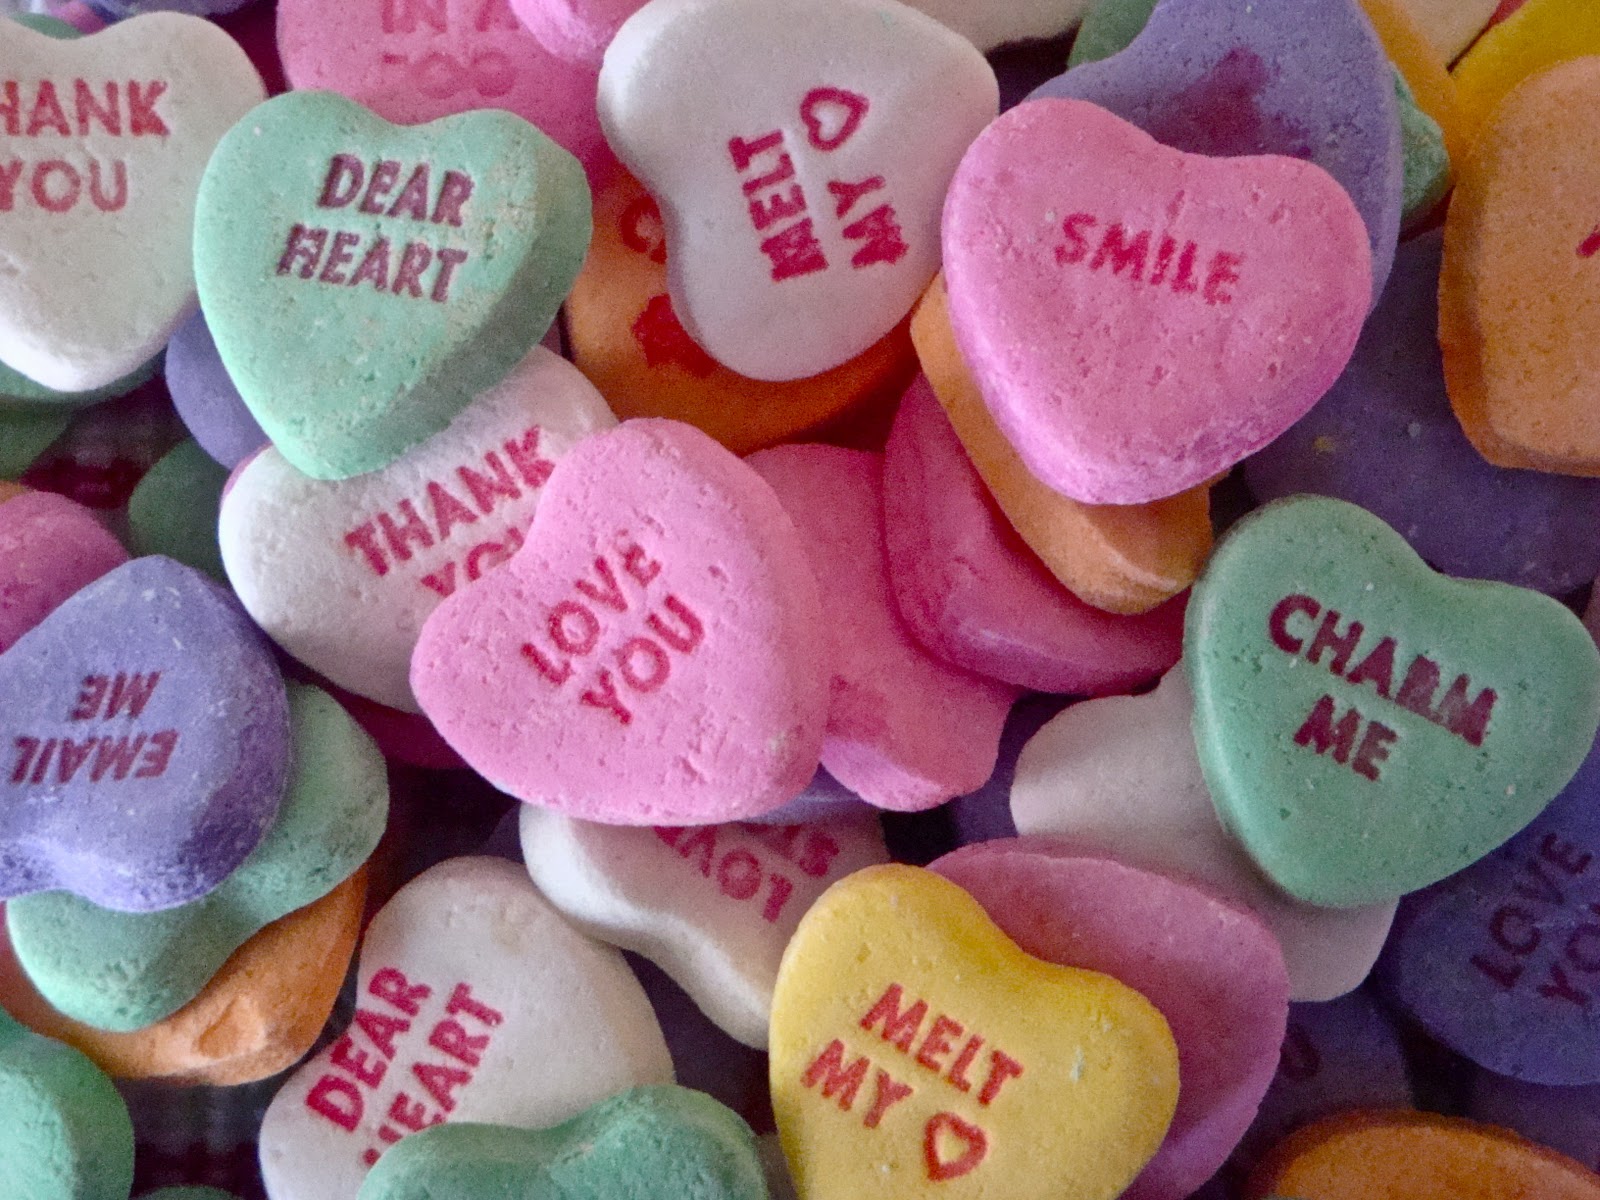 Free download From Saintly Starts to Candy Hearts Smart Girls Group [1600x1200] for your Desktop, Mobile & Tablet. Explore Valentine's Day Candy Hearts Wallpaper. Valentines Day Background Picture, Funny